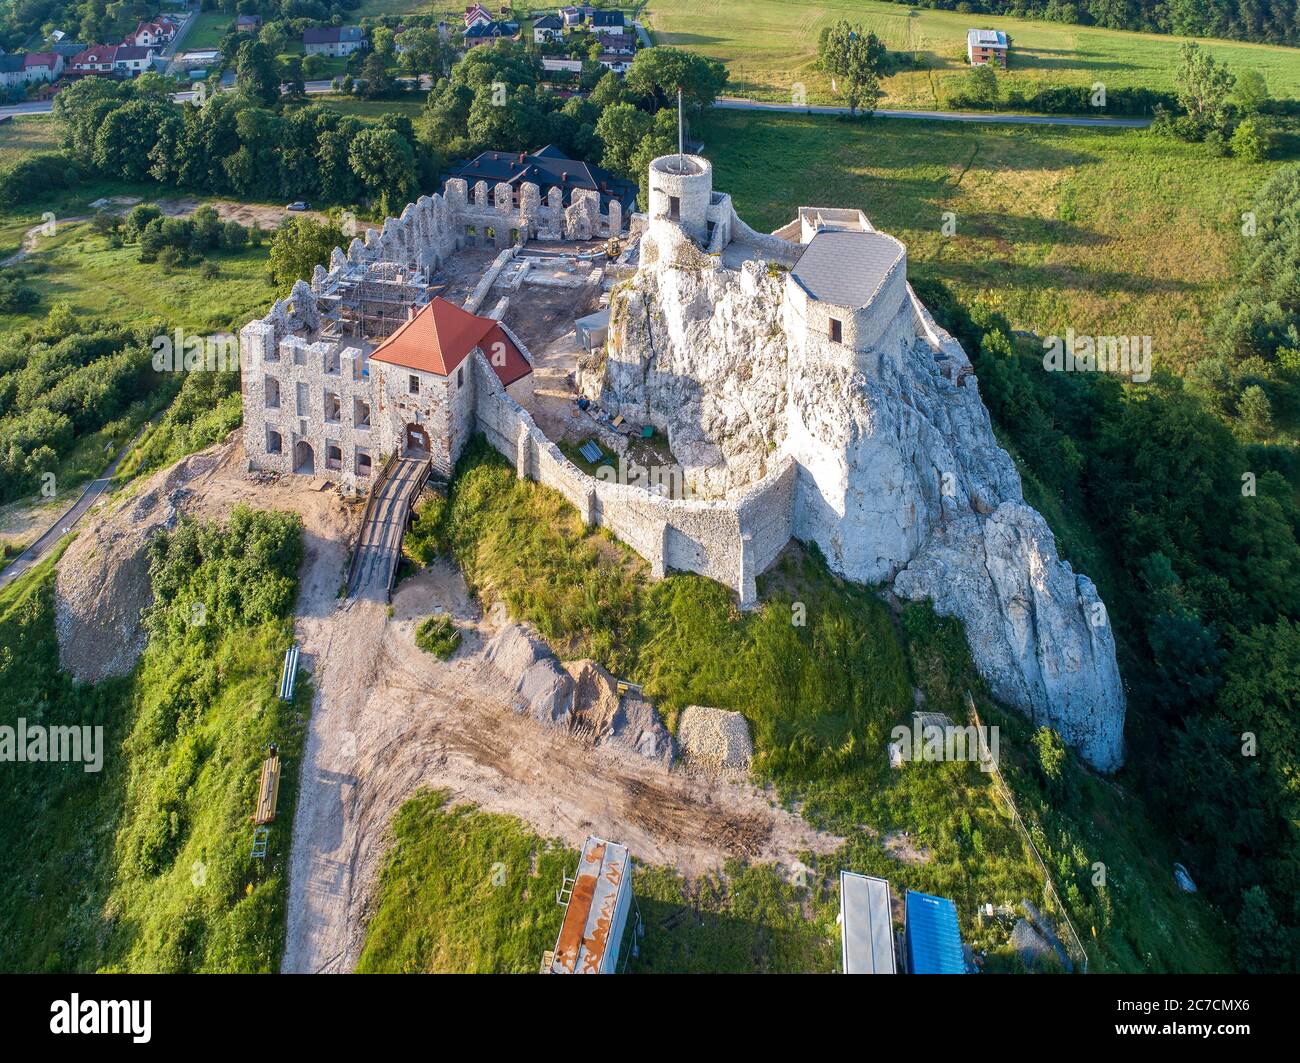 Rabsztyn, Poland. Ruins of medieval royal castle on the rock in Polish Jurassic Highland. Aerial view in sunrise light in summer. Renovation and arche Stock Photo